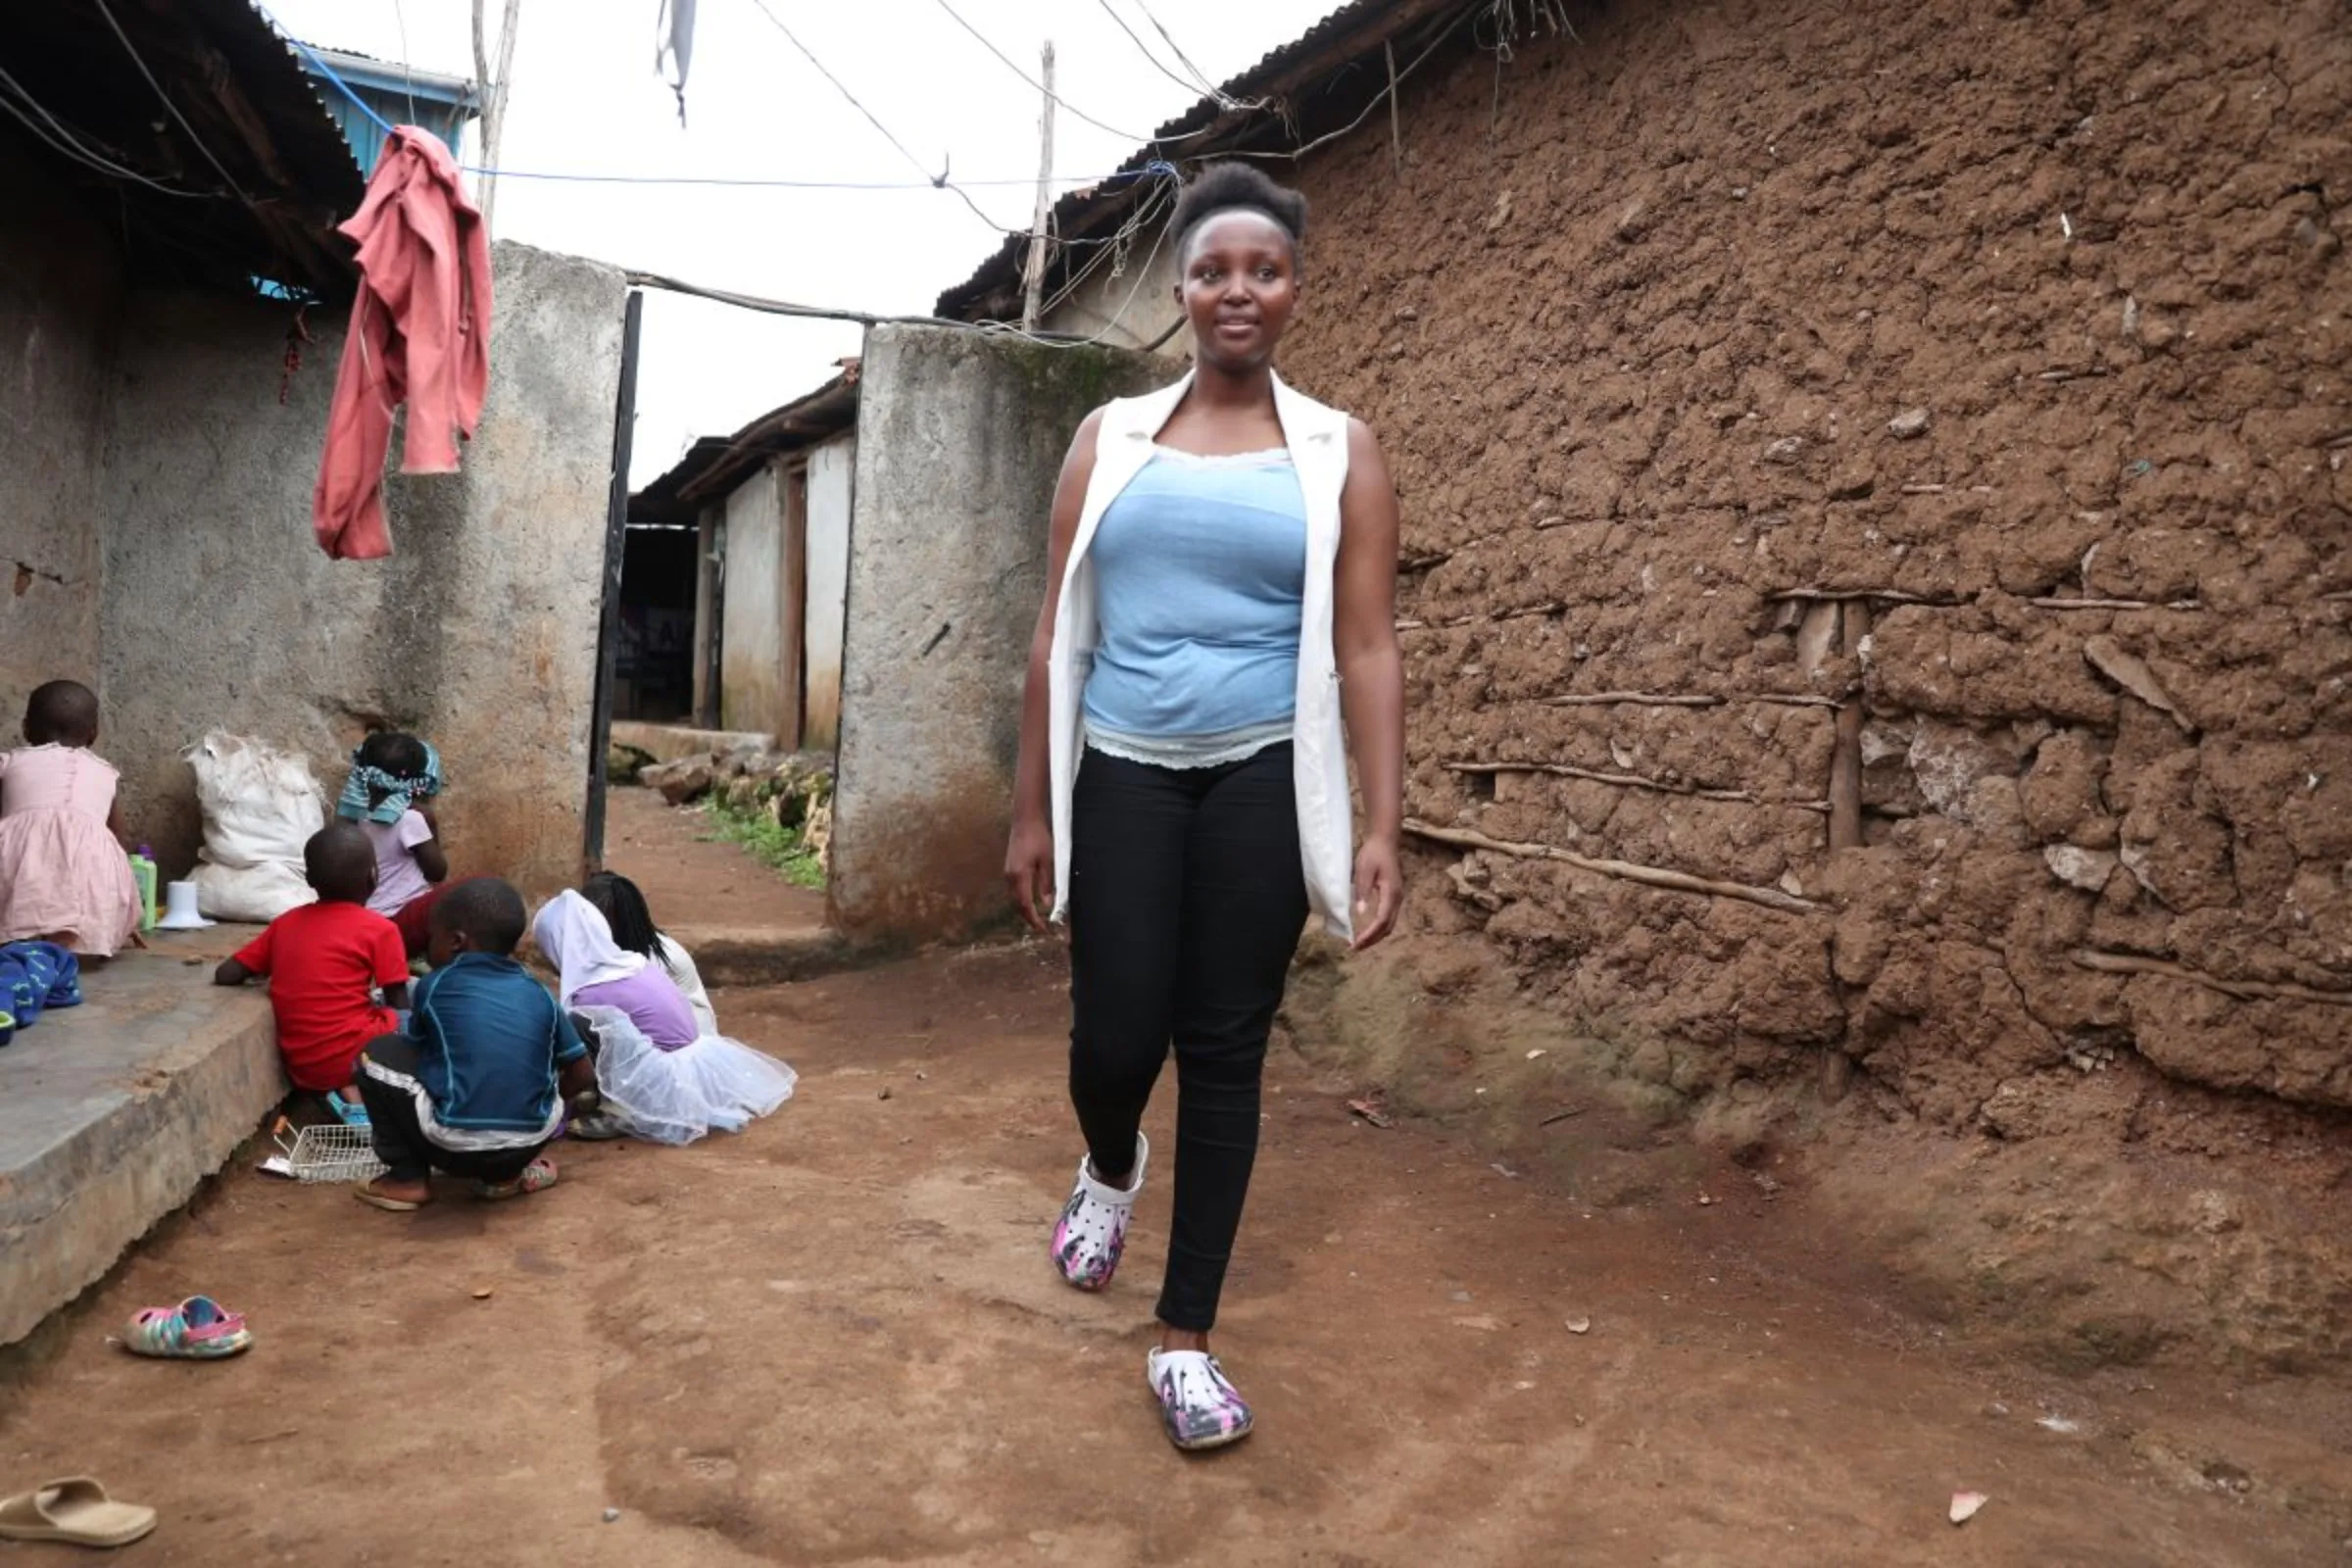 Lilian Makau, 20, walks in in Kibera informal settlement in Nairobi, Kenya on April 24, 2023. She said her story shows the need for more action to tackle period poverty